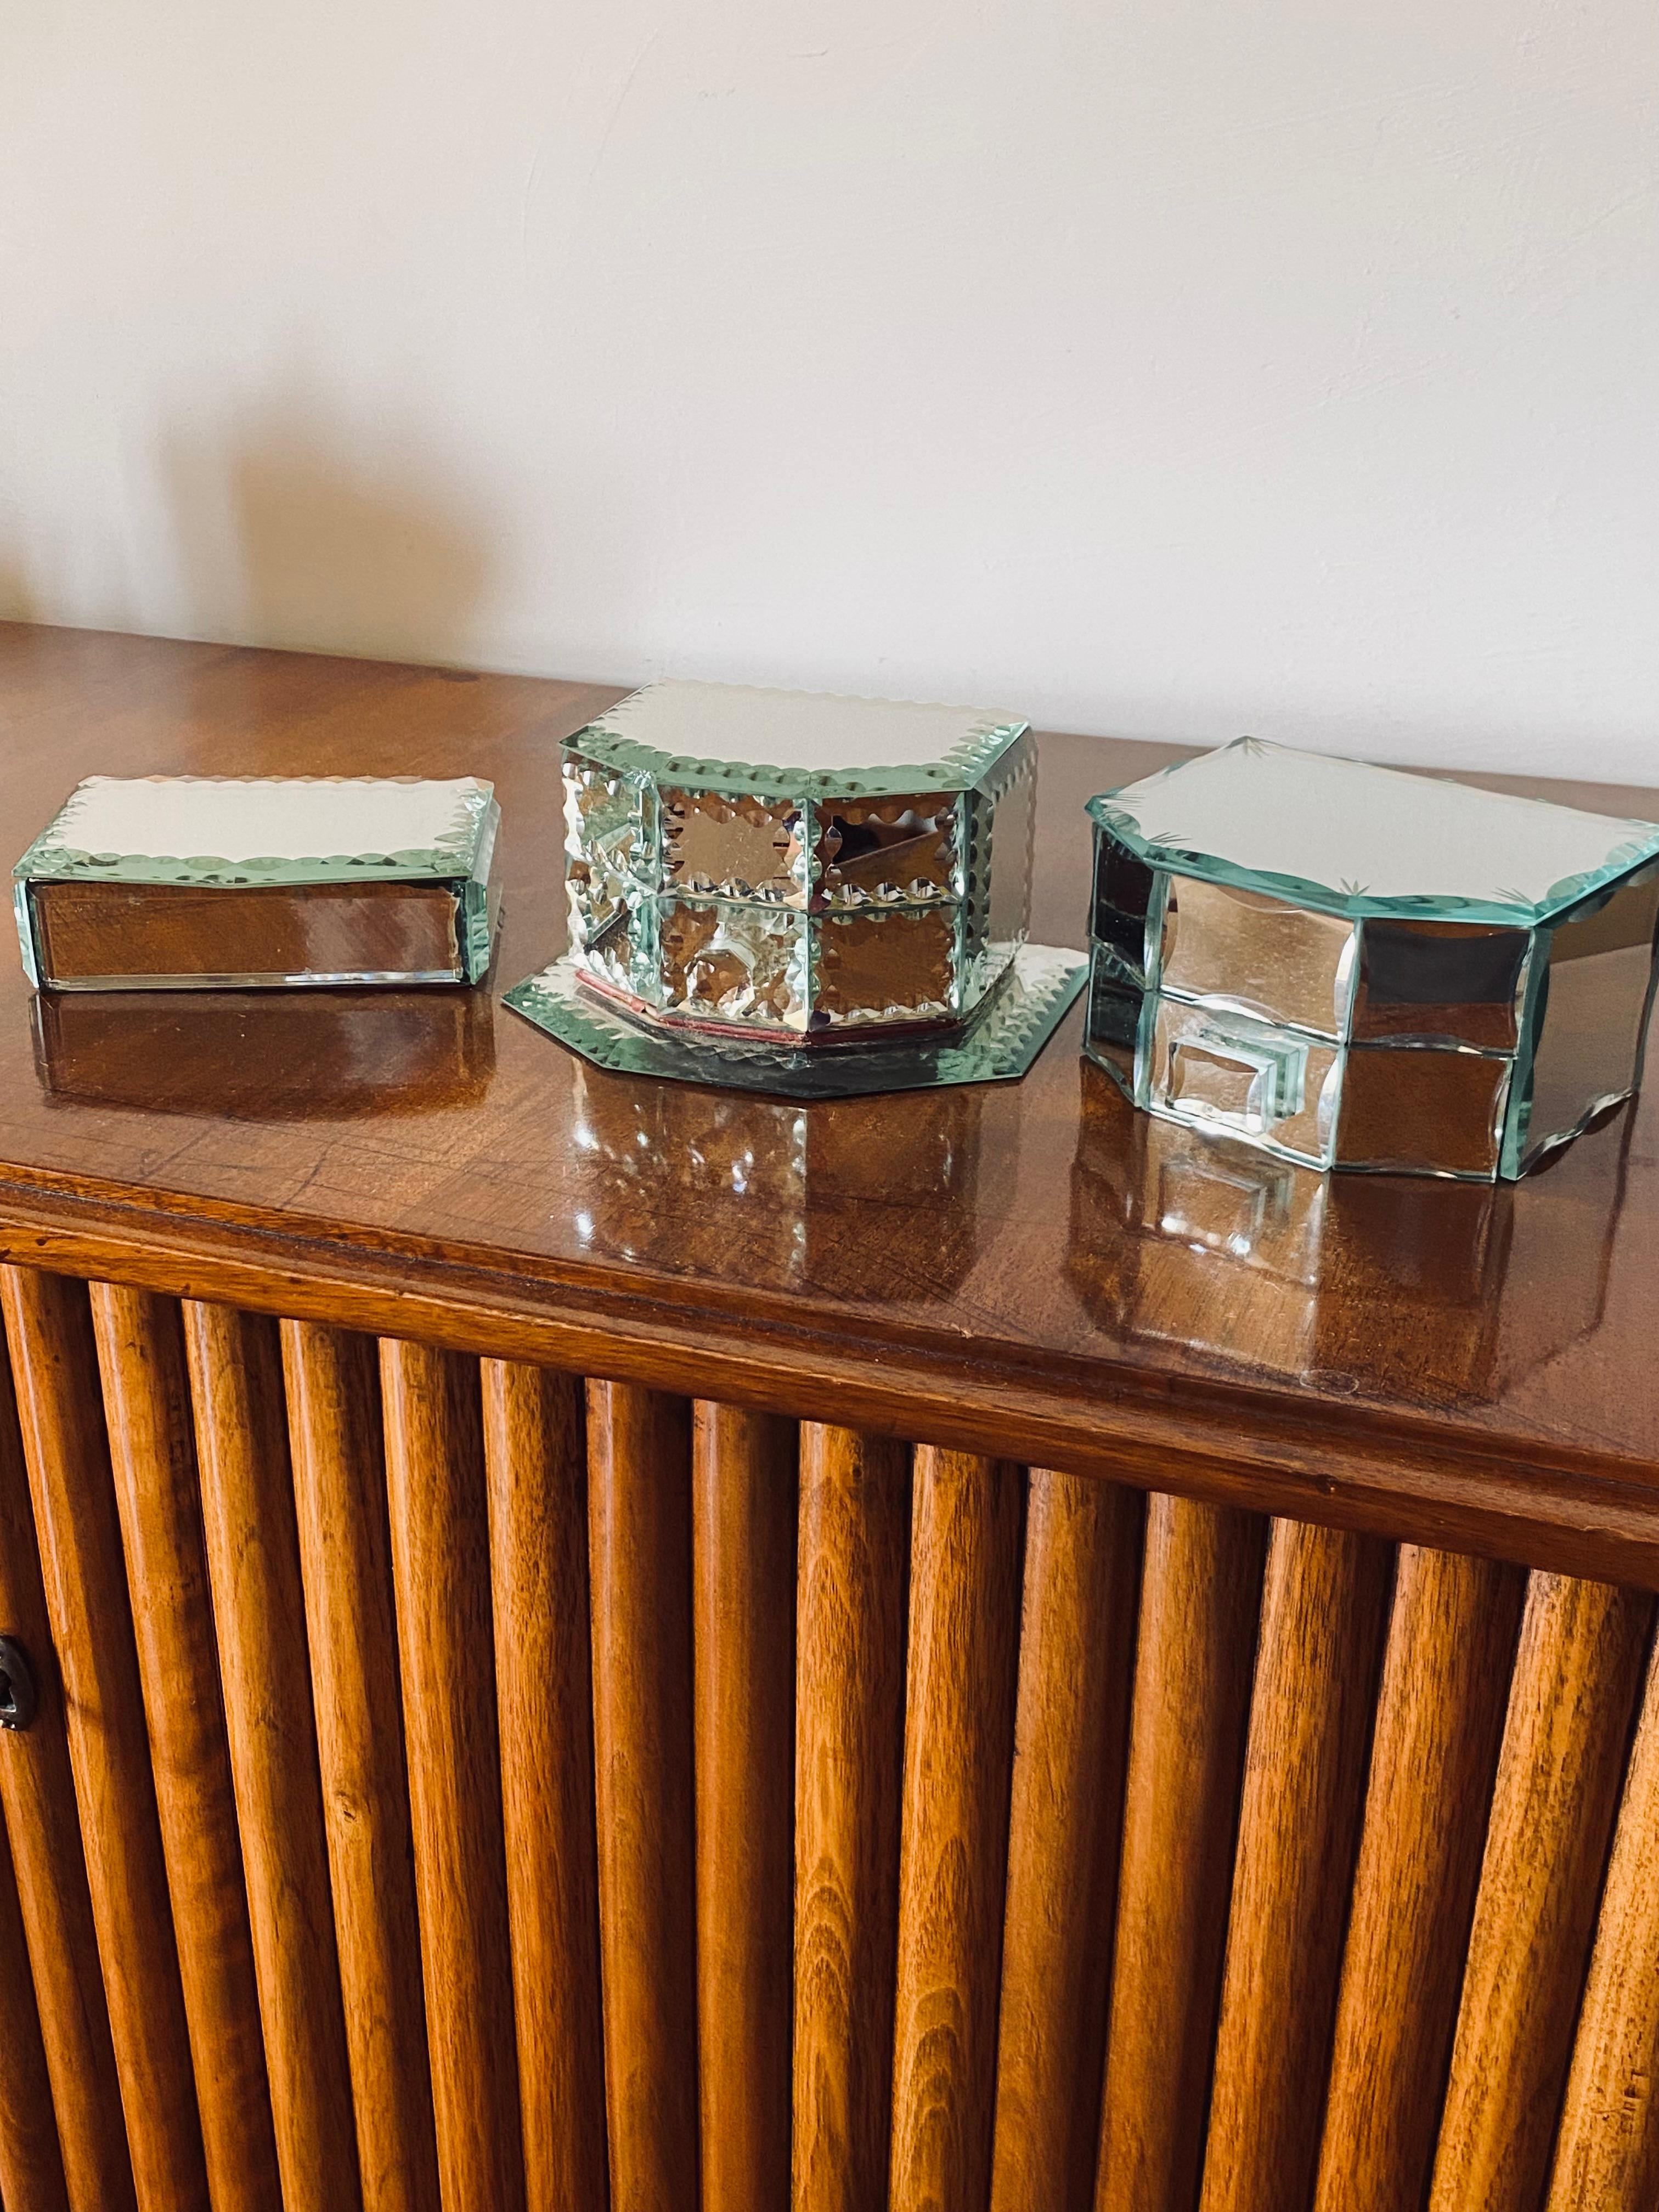 Midcentury Set of 3 mirrored Jewelry Boxes

France 1940s

fabric, wood, glass

Box with base: H 9 cm - 16.5 x 15 cm

Conditions: very good consistent with age and use, small chips on one box.